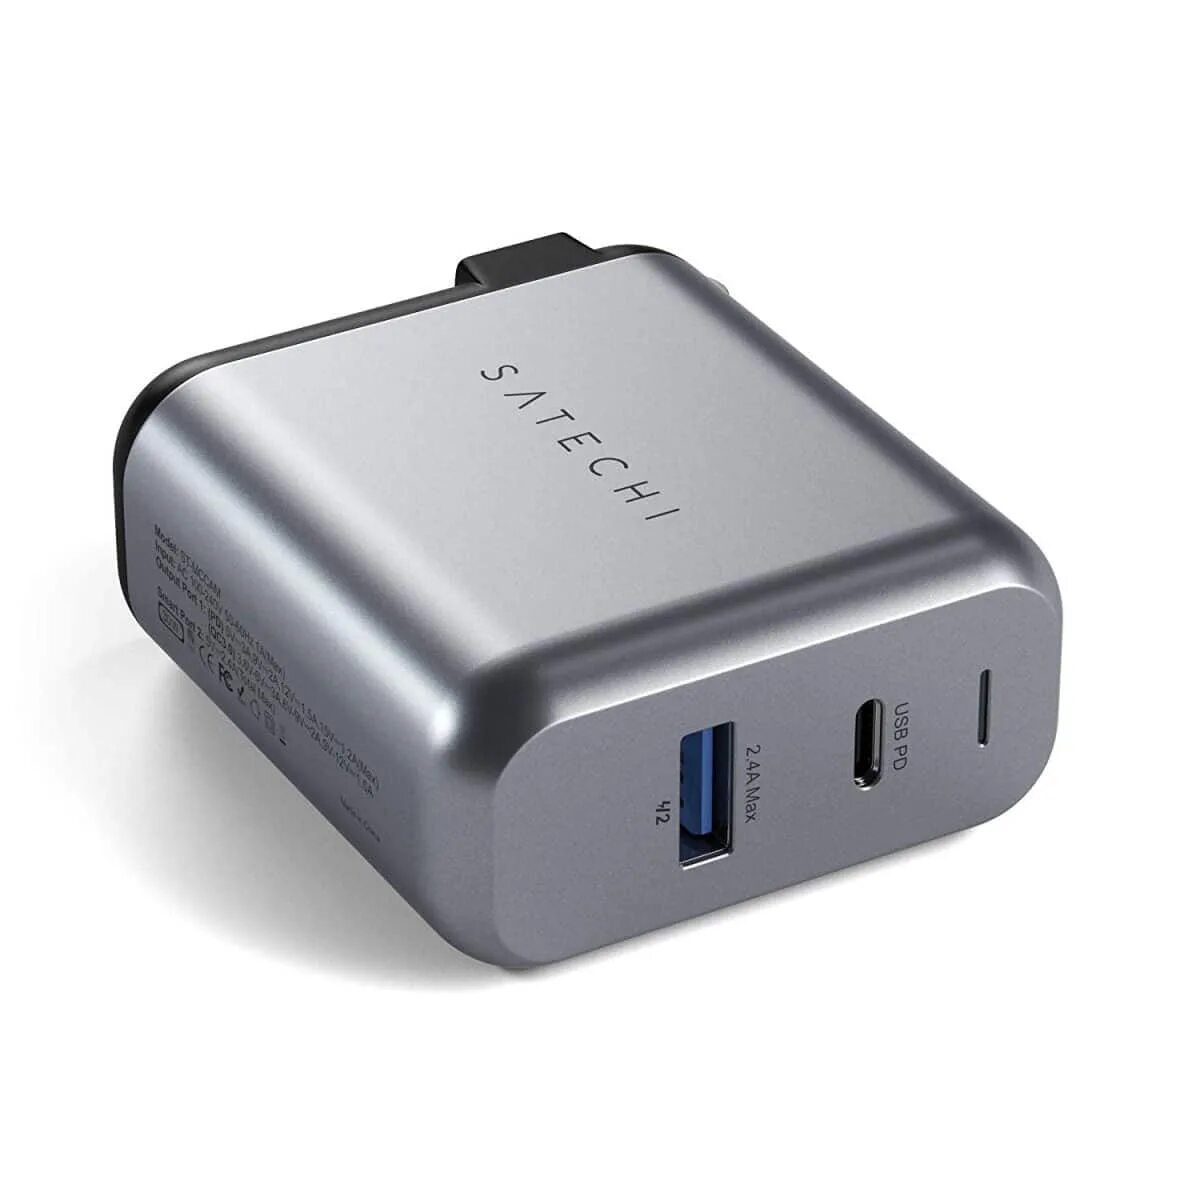 Satechi 30w Dual-Port Travel Charger серый космос. Satechi 30w Dual-Port Wall Charger 3200. Satechi 100w USB Wall Charger. Satechi 20w USB-C.